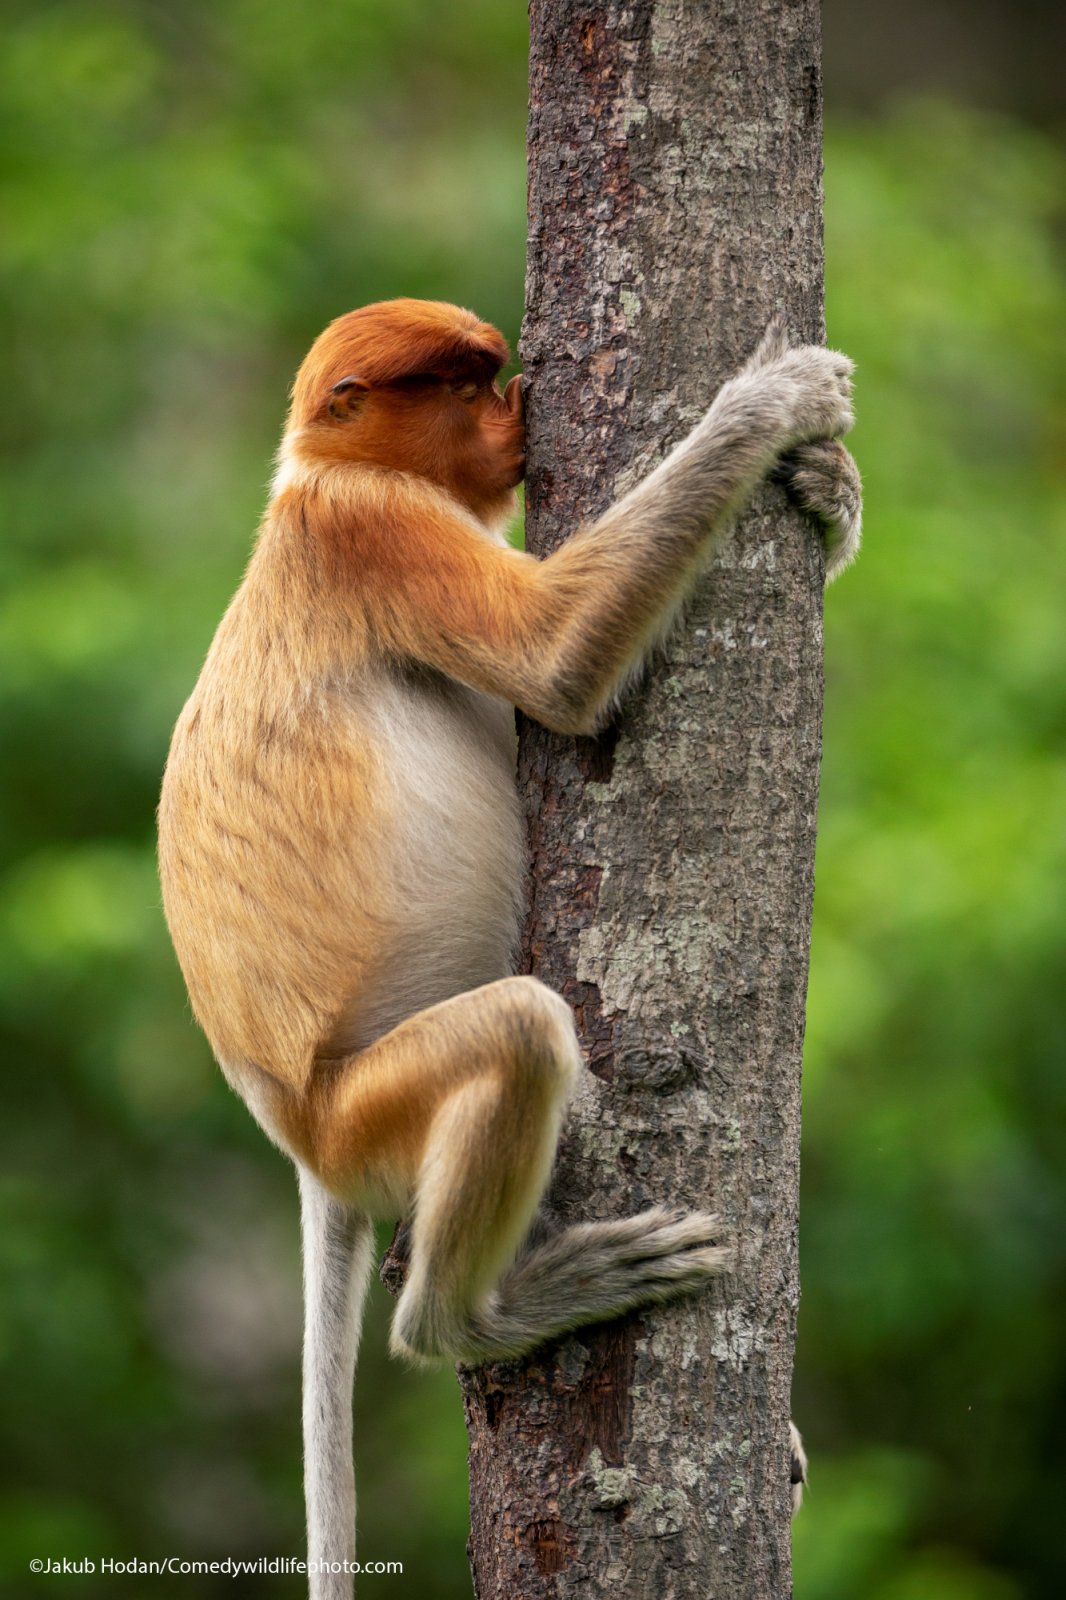 “This Proboscis monkey could be just scratching its nose on the rough bark, or it could be kissing it. Trees play a big role in the lives of monkeys. Who are we to judge...”